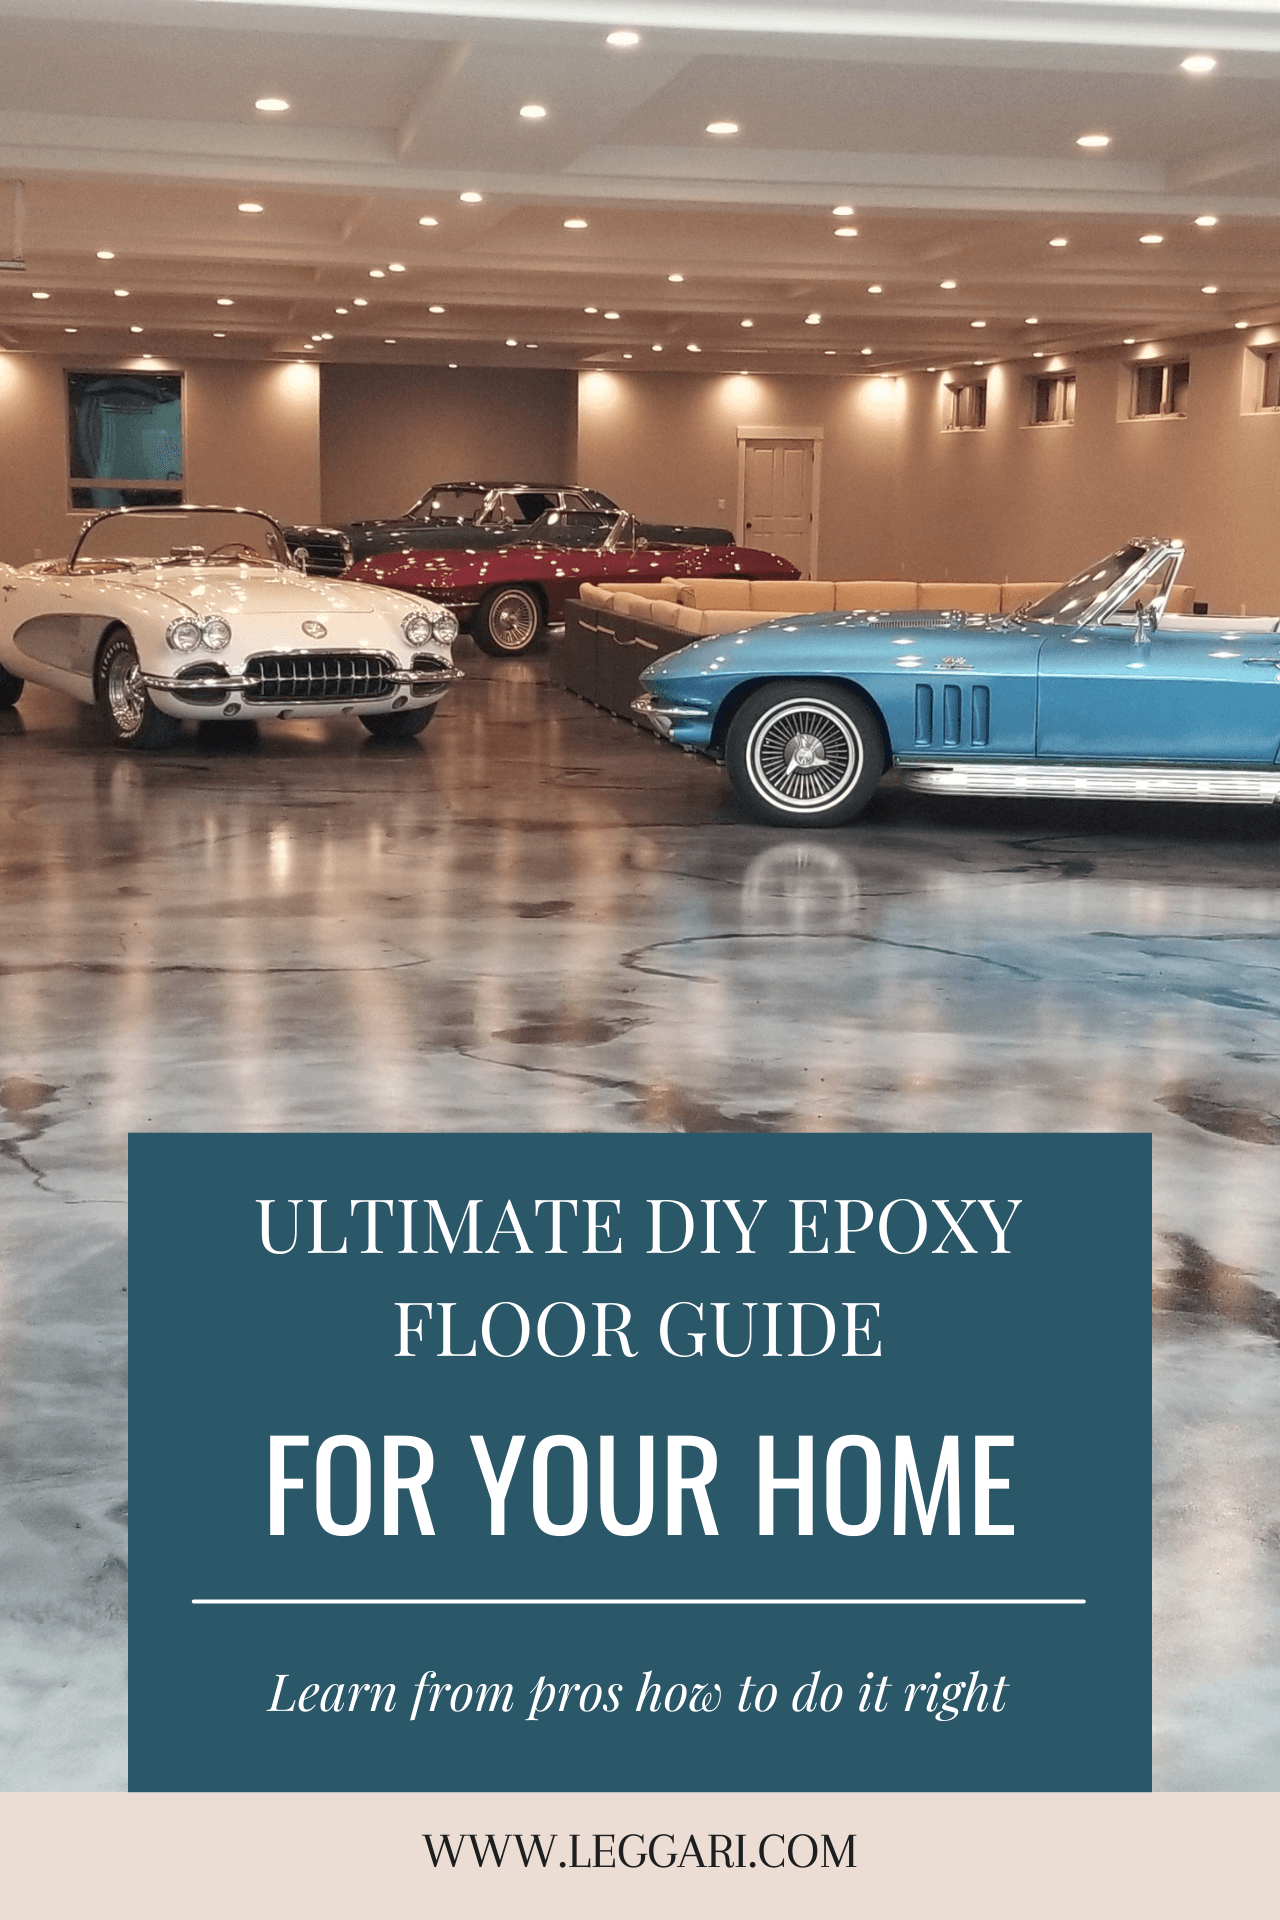 Ultimate DIY Epoxy Floor Guide For Your Home - Learn How The Pros Do It Right